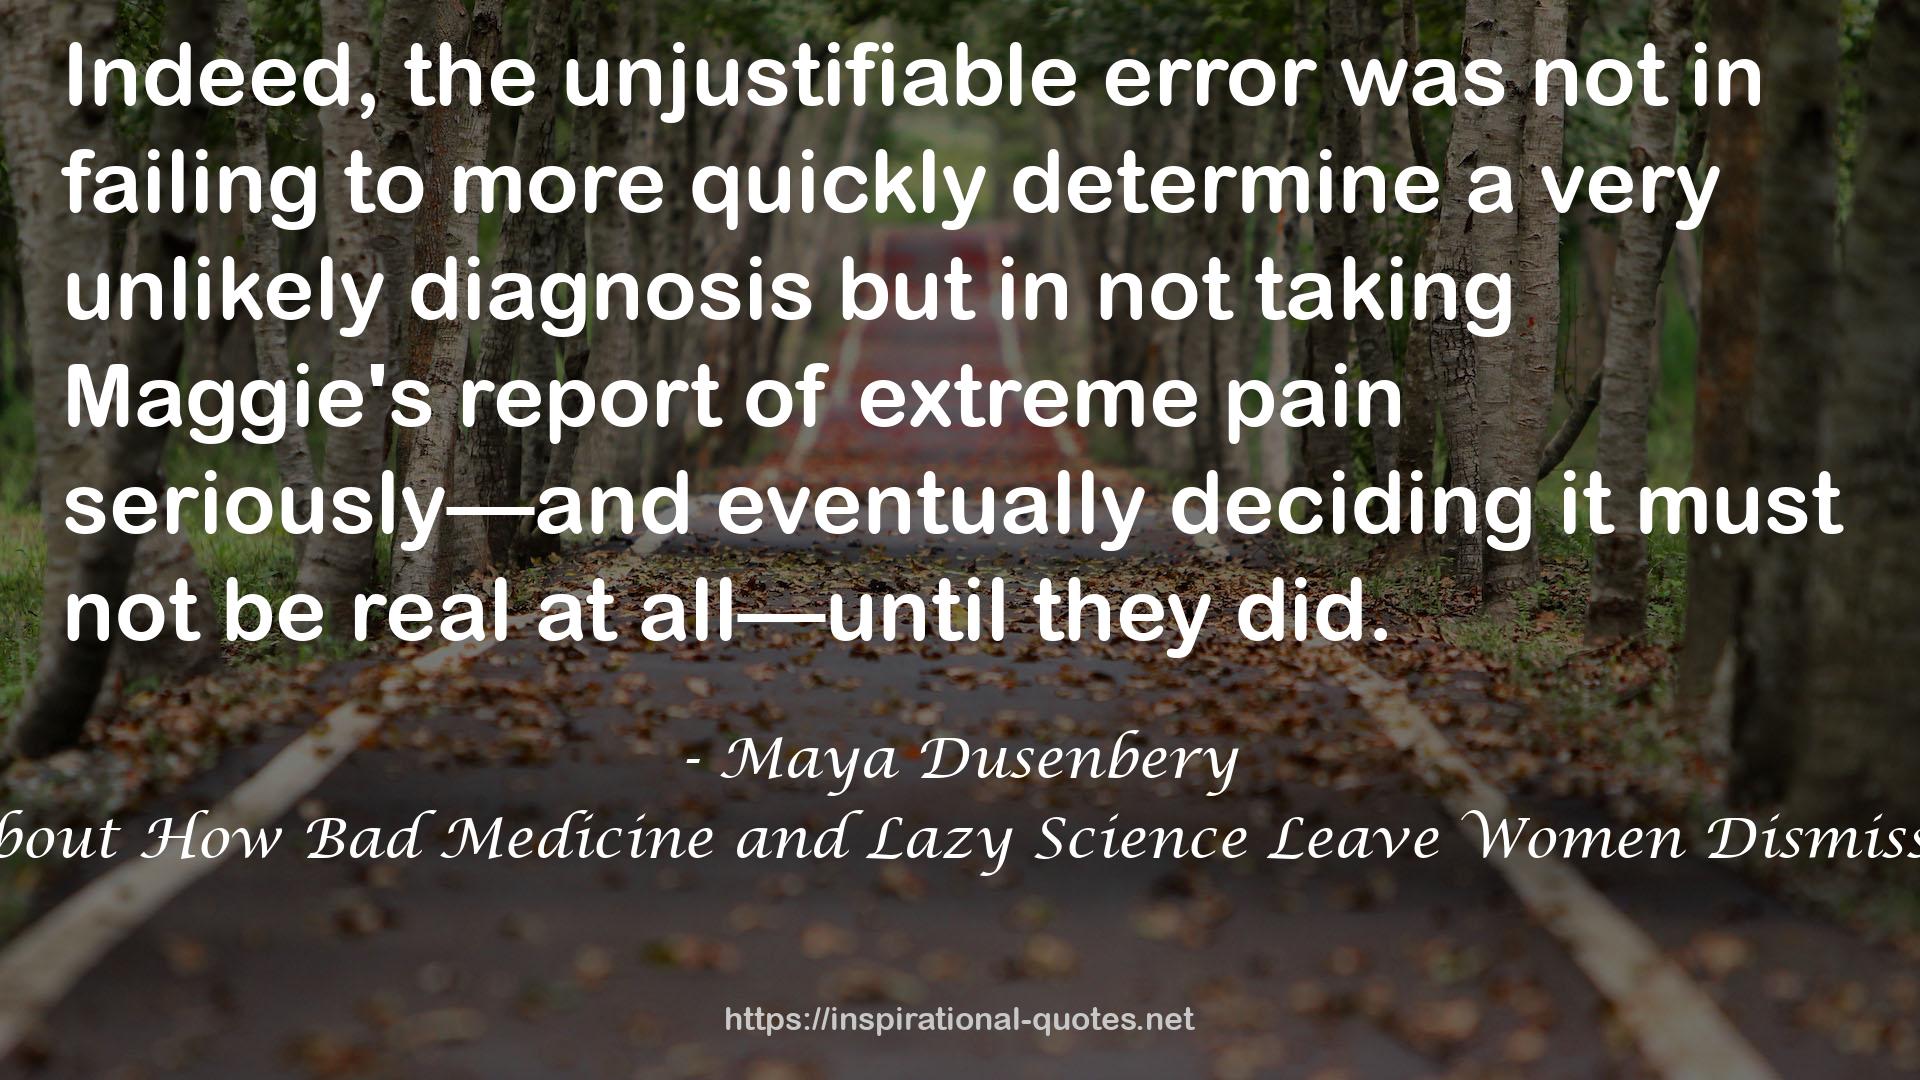 Doing Harm: The Truth About How Bad Medicine and Lazy Science Leave Women Dismissed, Misdiagnosed, and Sick QUOTES